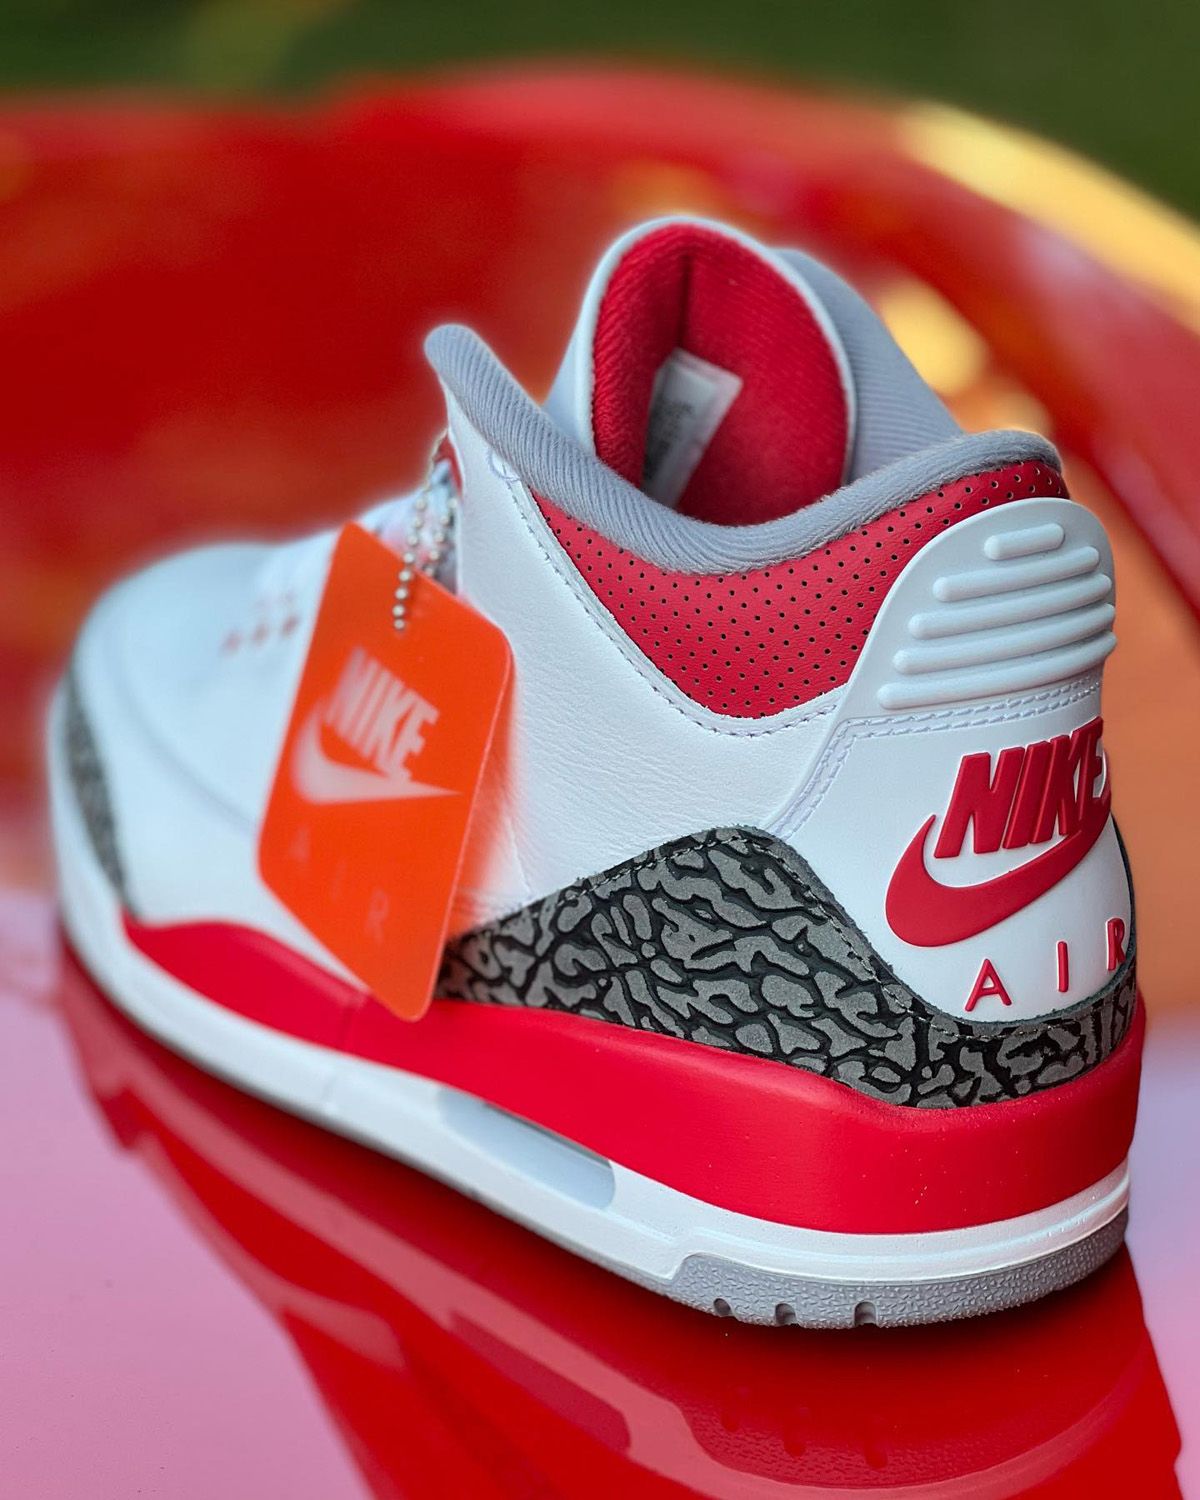 Where to Buy the Air Jordan 3 “Fire Red” OG | House of Heat°